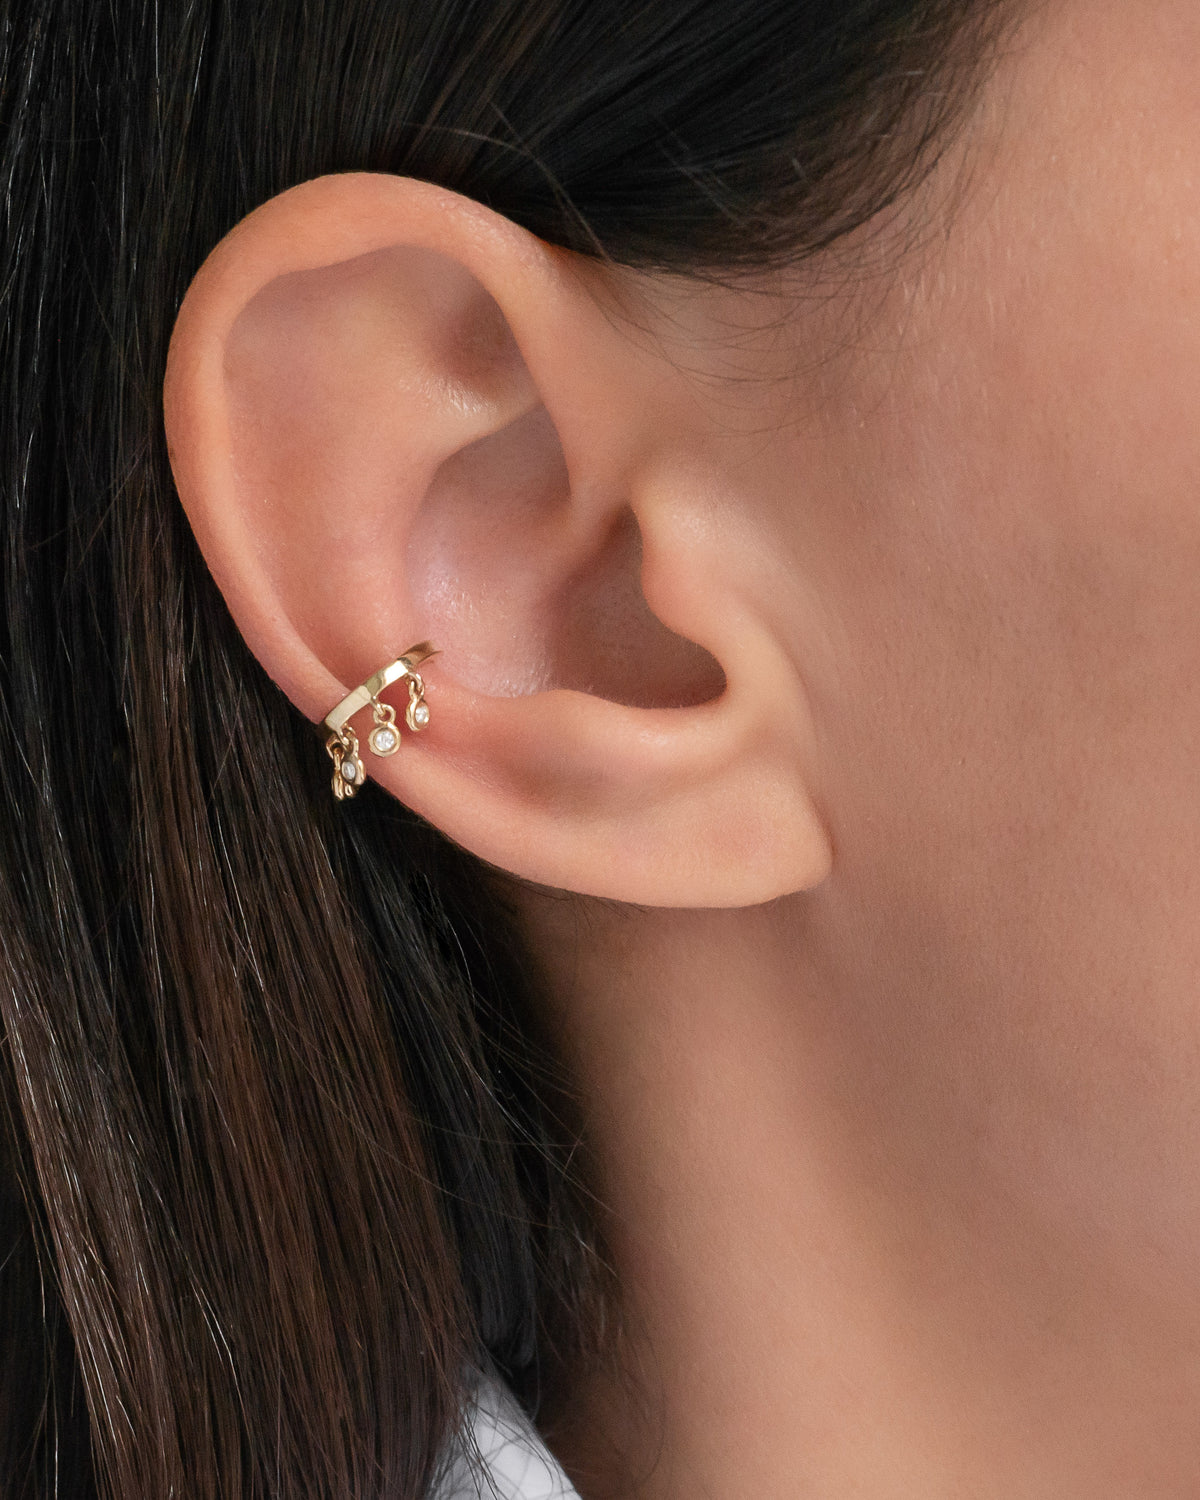 14k Gold Ear Cuff with Diamond Fringes